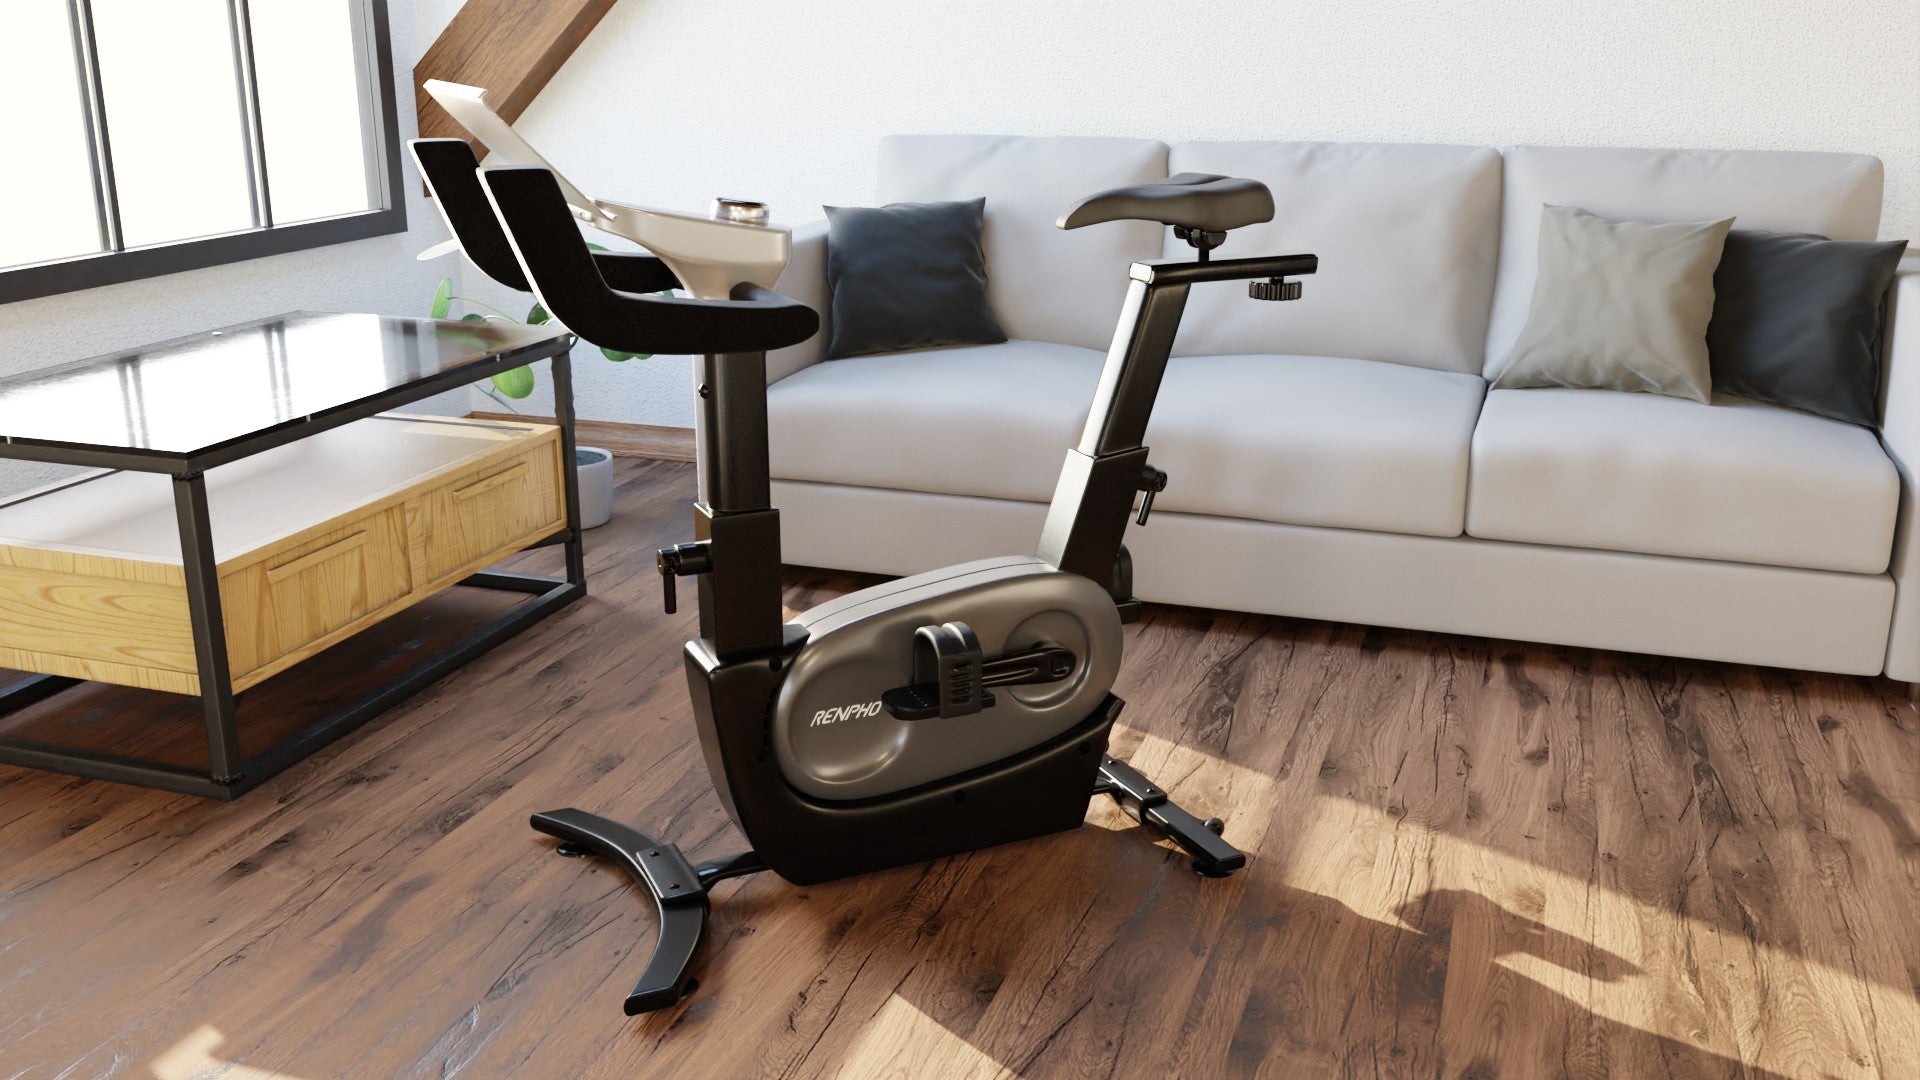 Ergometer for the Home: Is It Right for You?